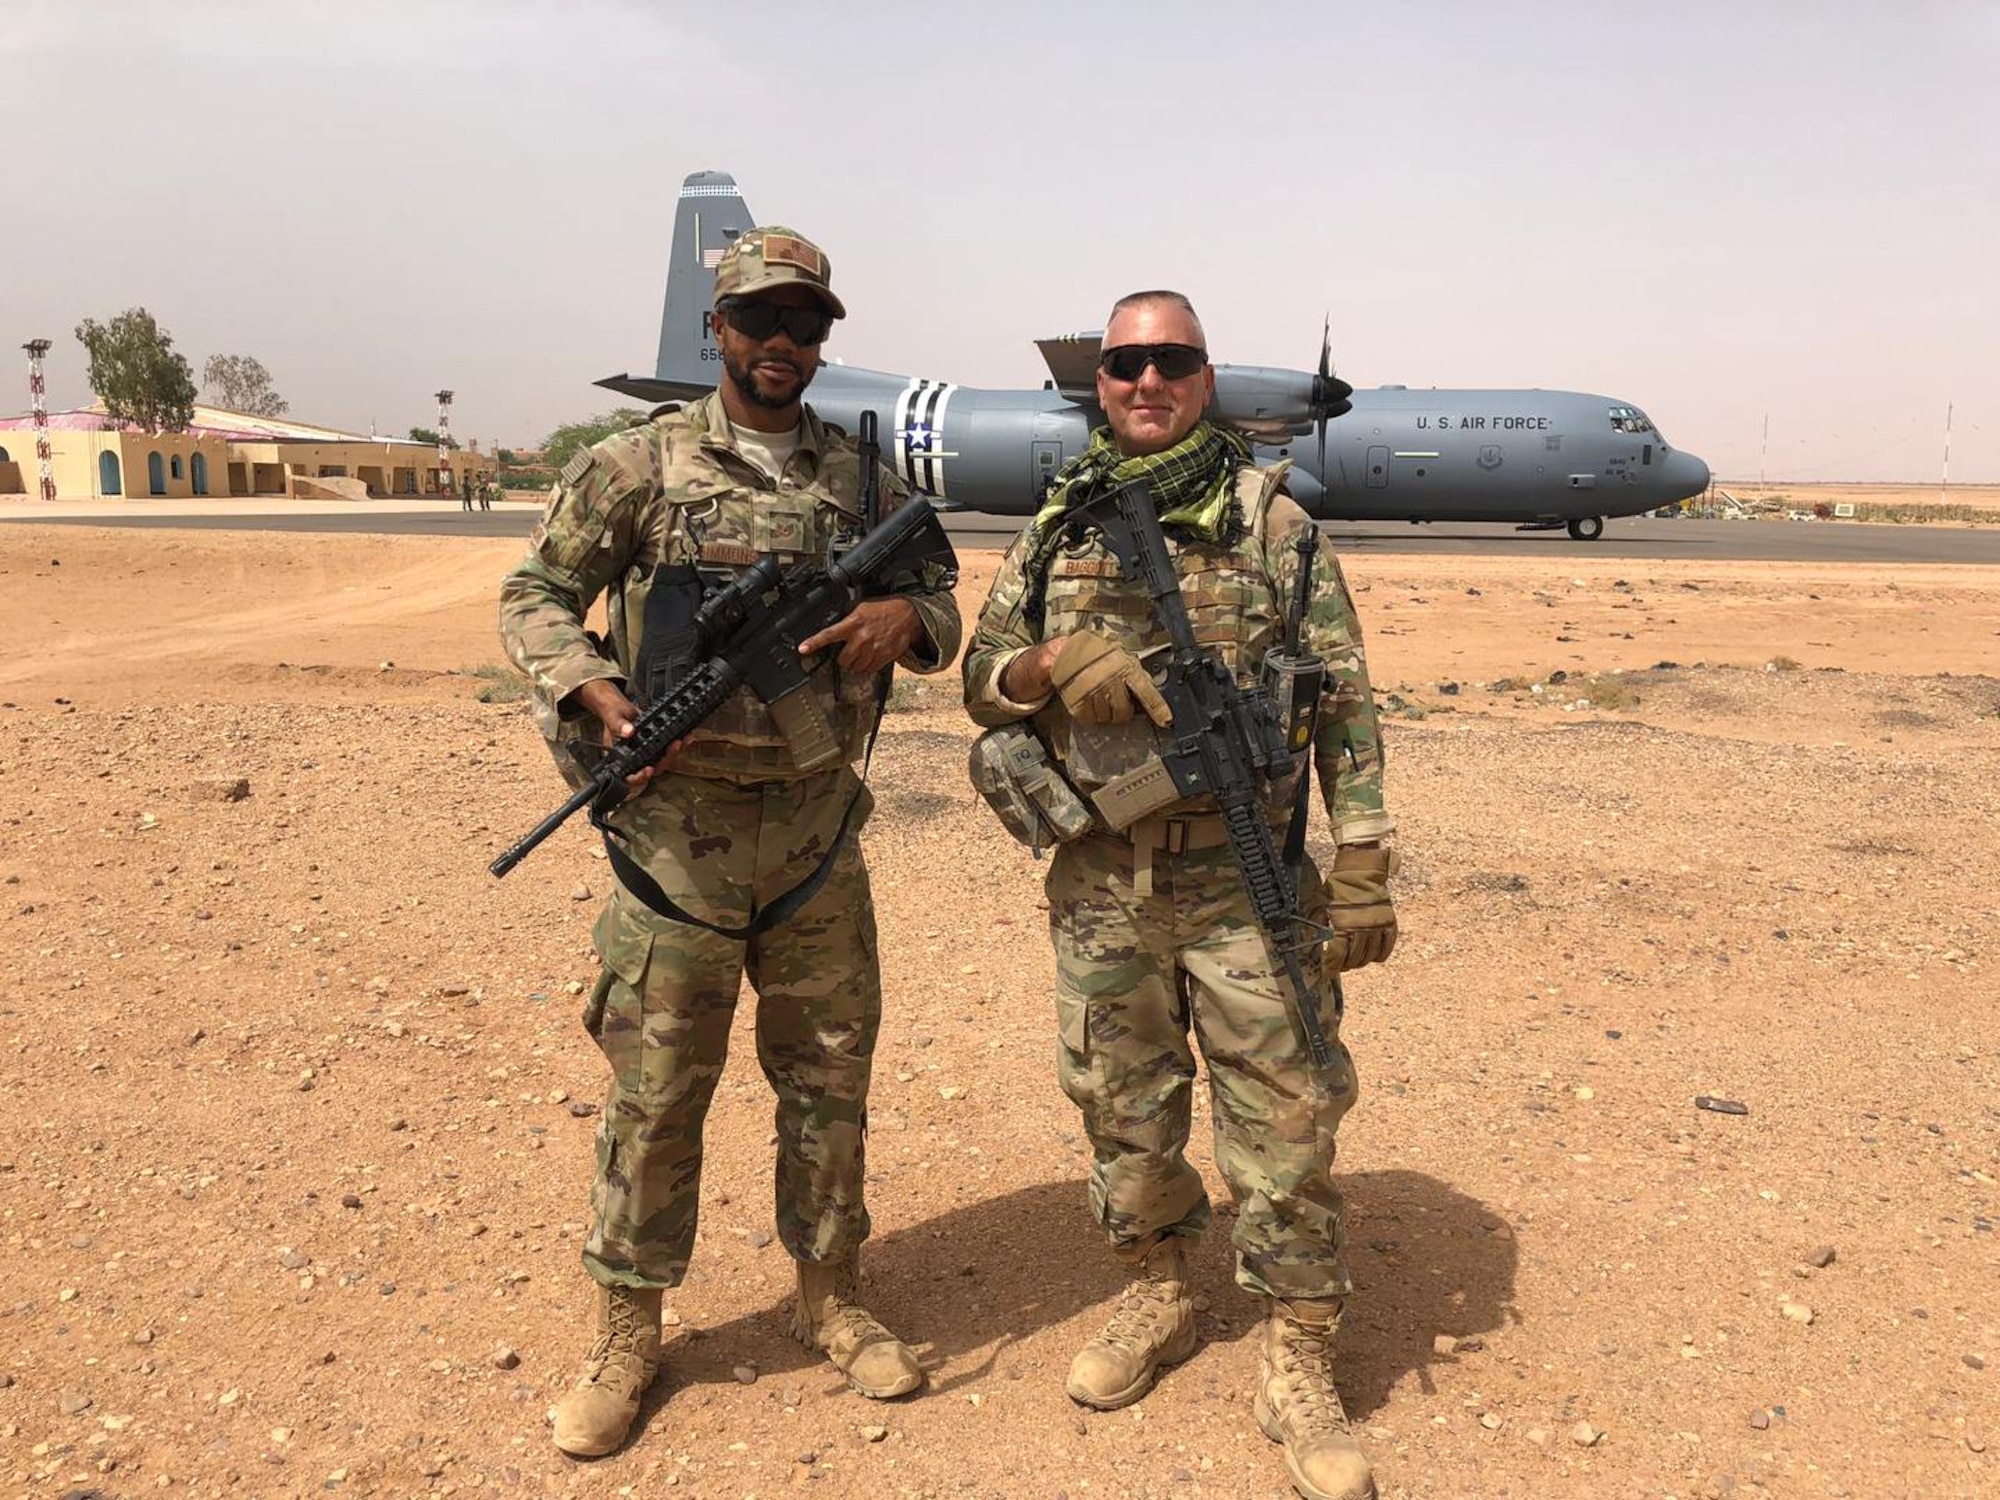 Tech. Sgts. James Baggott and Johnathan Simmmons, 403rd Logistics Readiness Squadron transportation specialists, deployed to Air Base 201, Agadez, Niger for a six-month tour conductions vehicle operations in the Logisitcs Readiness Flight for the 724 Expeditionary Air Base Squadron. The LRF was responsible for the transport of personnel, cargo and supplies. (U.S. Air Force photo provided by Tech. Sgt. James Baggott)